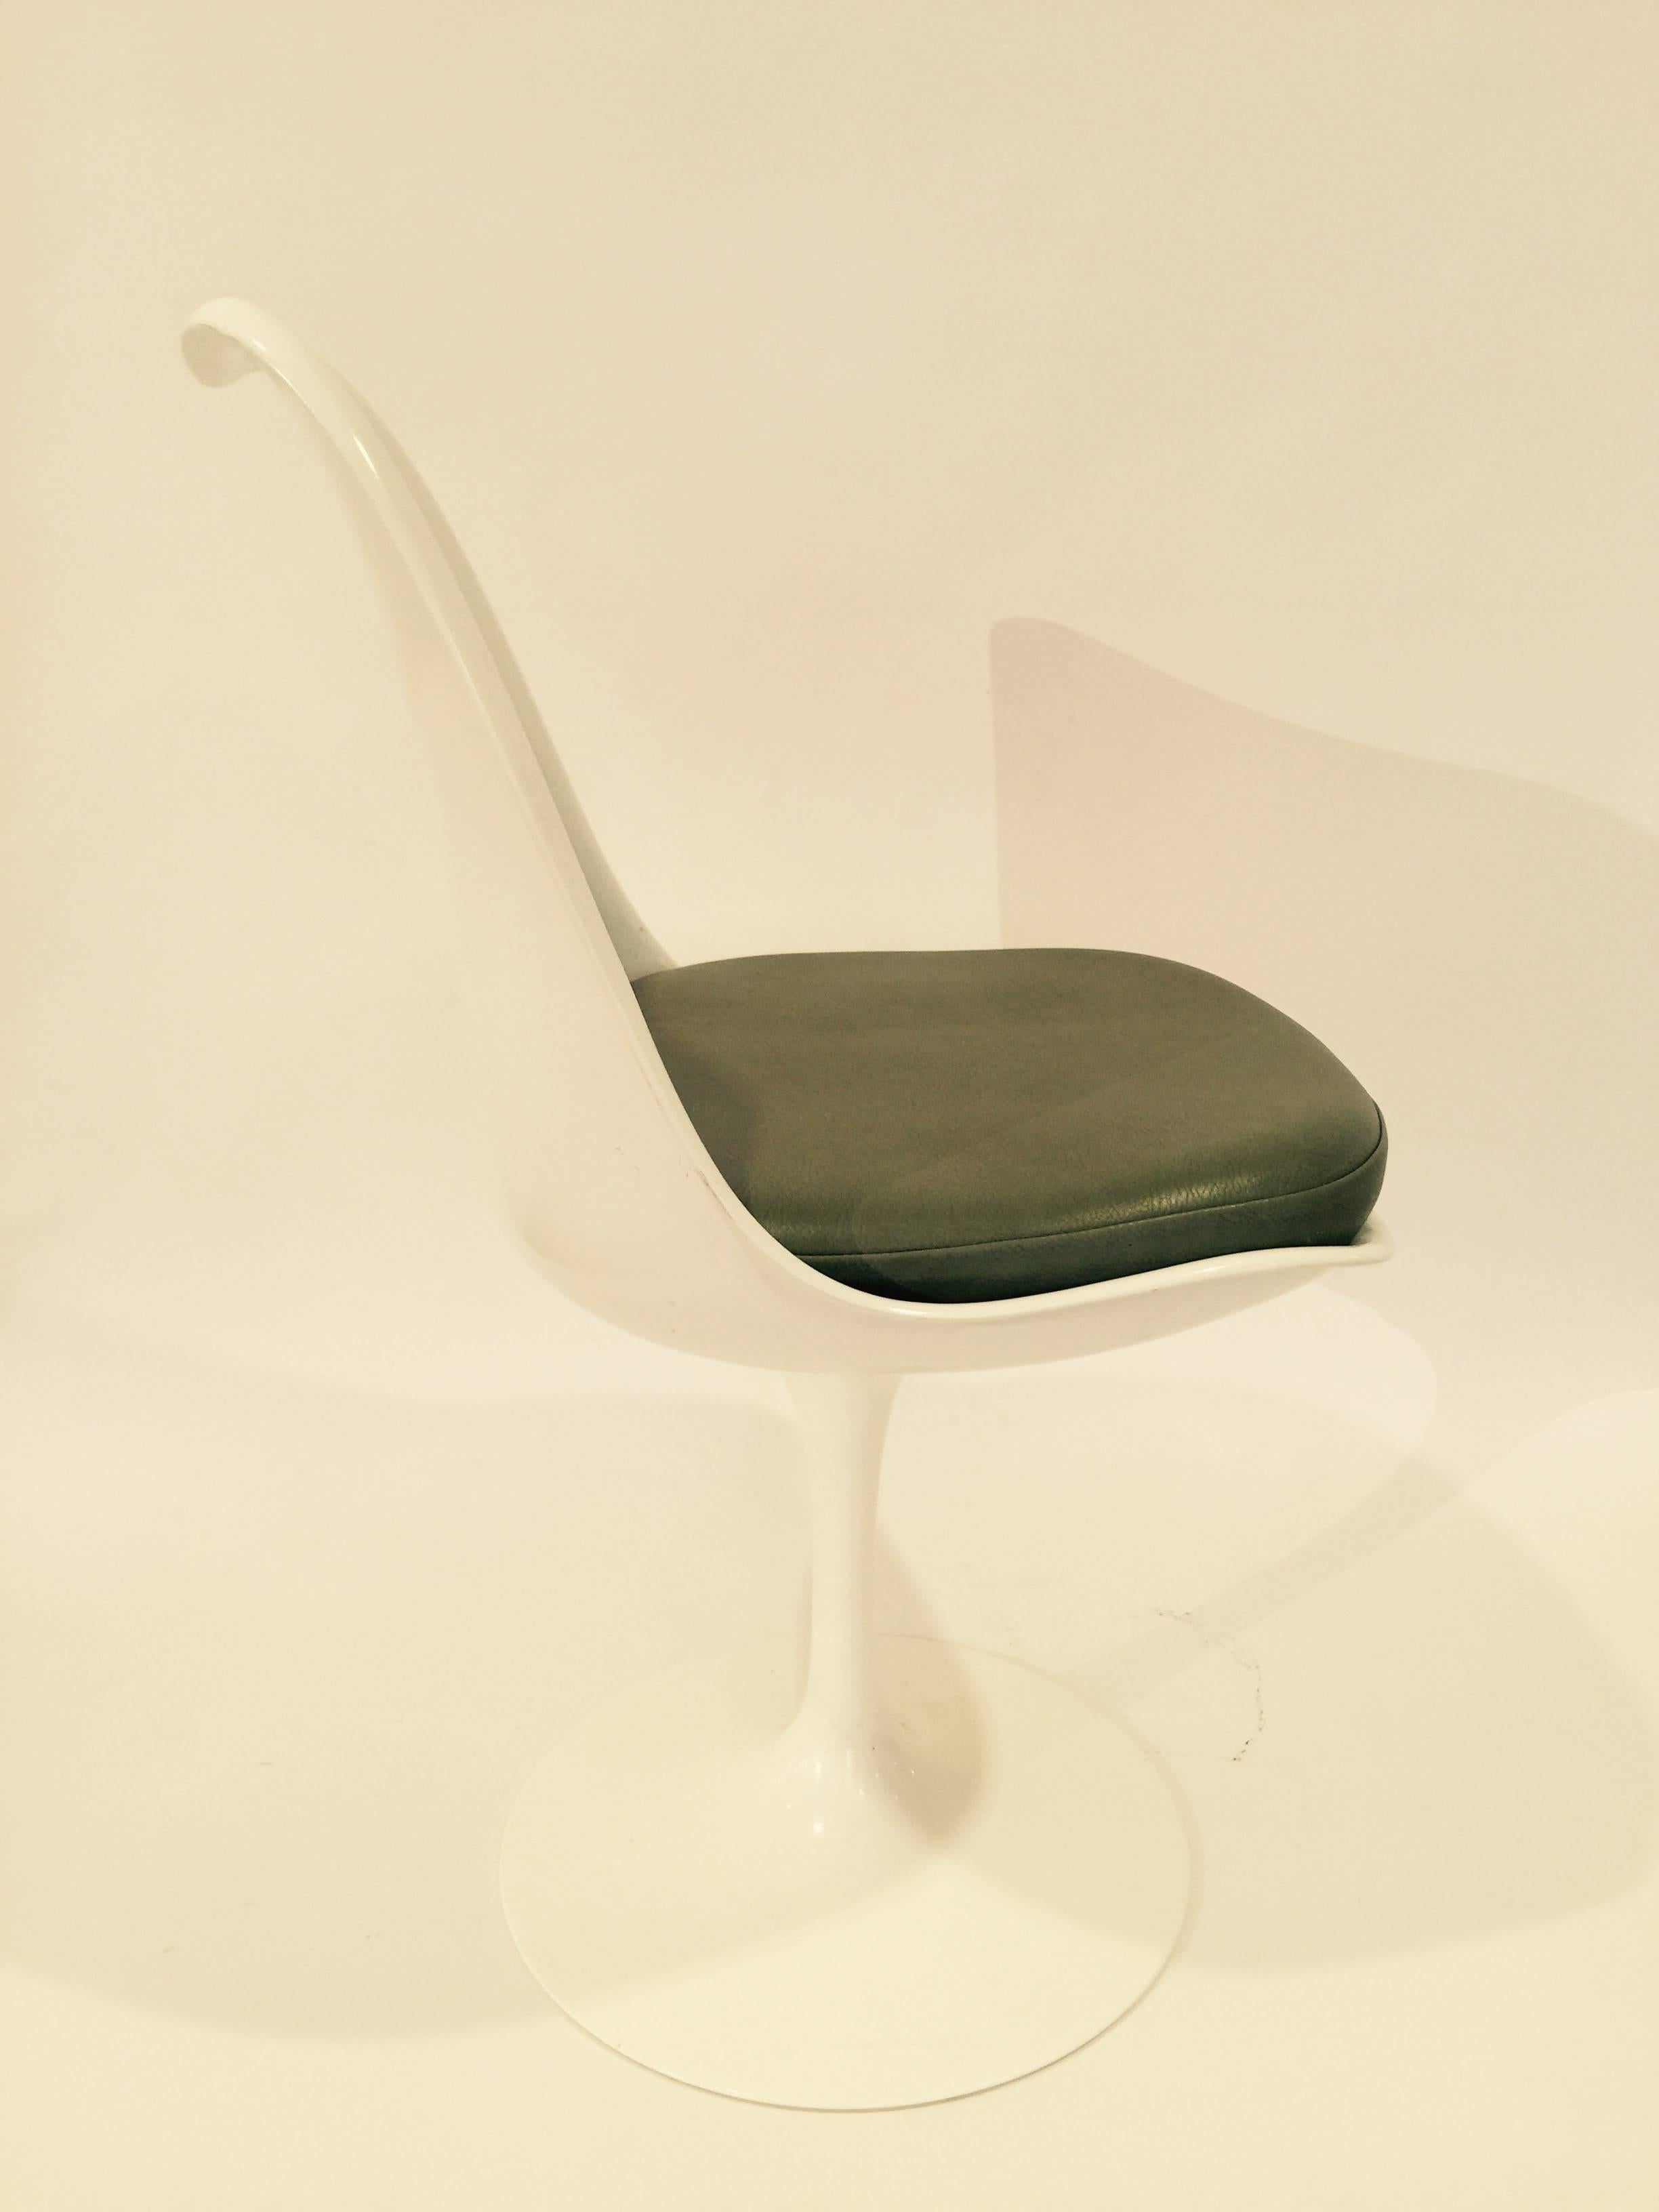 White tulip dining chairs by Saarinen for Knoll Studio, USA, circa 2005 production. Features white semi-gloss finish with olive green leather cushions. Signed. Priced individually; six available. 

Also available for rental with pick up from our